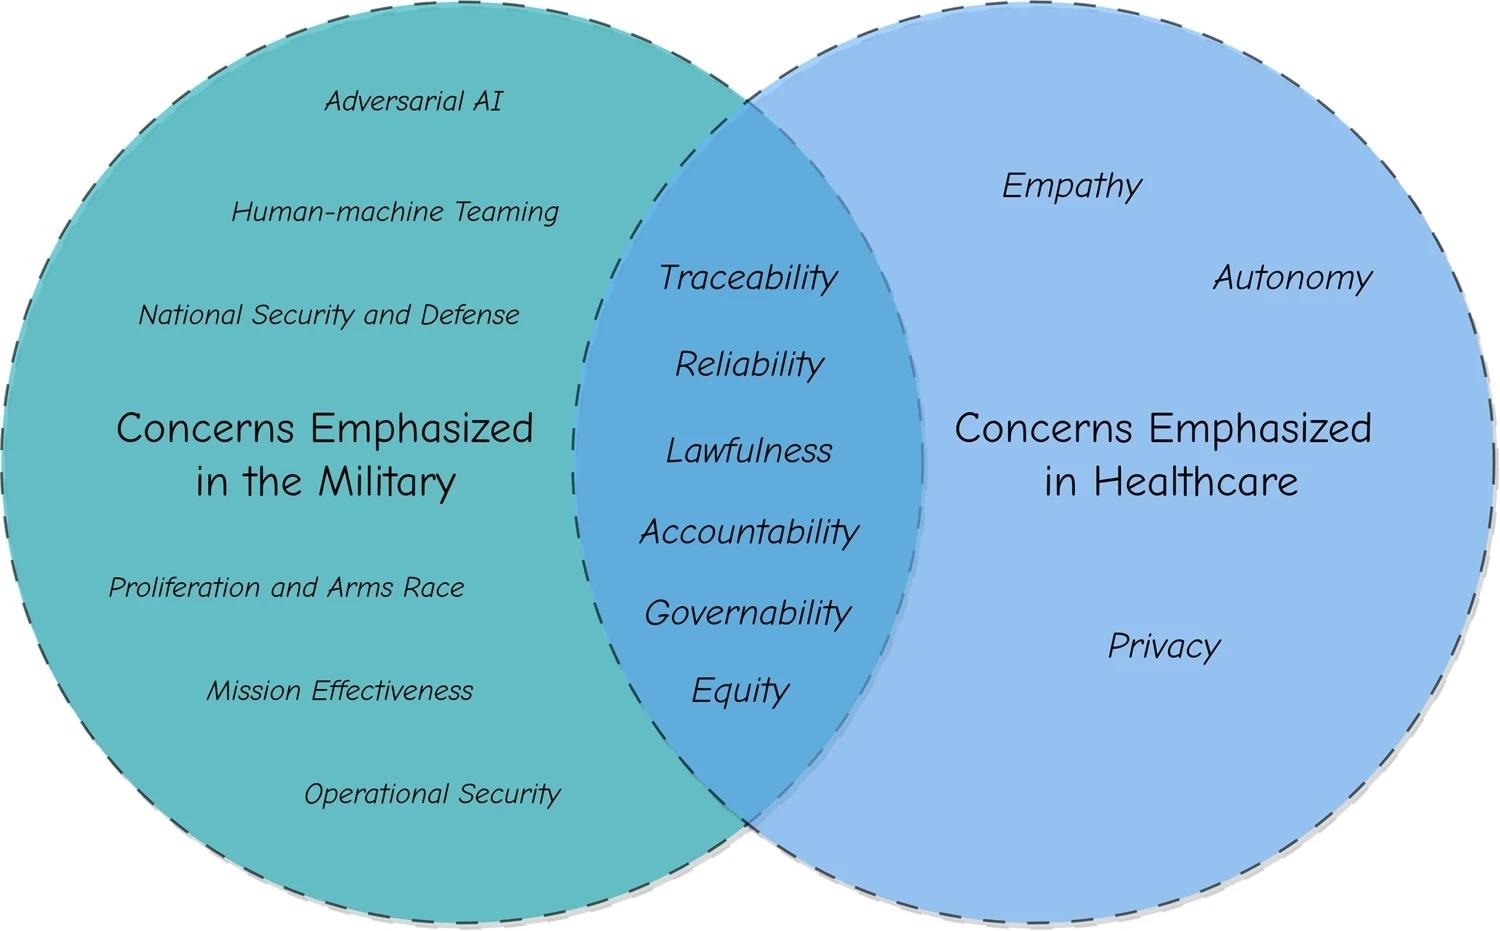 The figure illustrates the commonalities and differences in ethical principles between military and healthcare. In our assessment, traceability, reliability, lawfulness, accountability, governability, and equity are the ethical principles that both fields have in common. At the same time, ethical principles, such as empathy and privacy, are emphasized in healthcare, whereas ethical principles, such as national security and defense, are emphasized in the military.